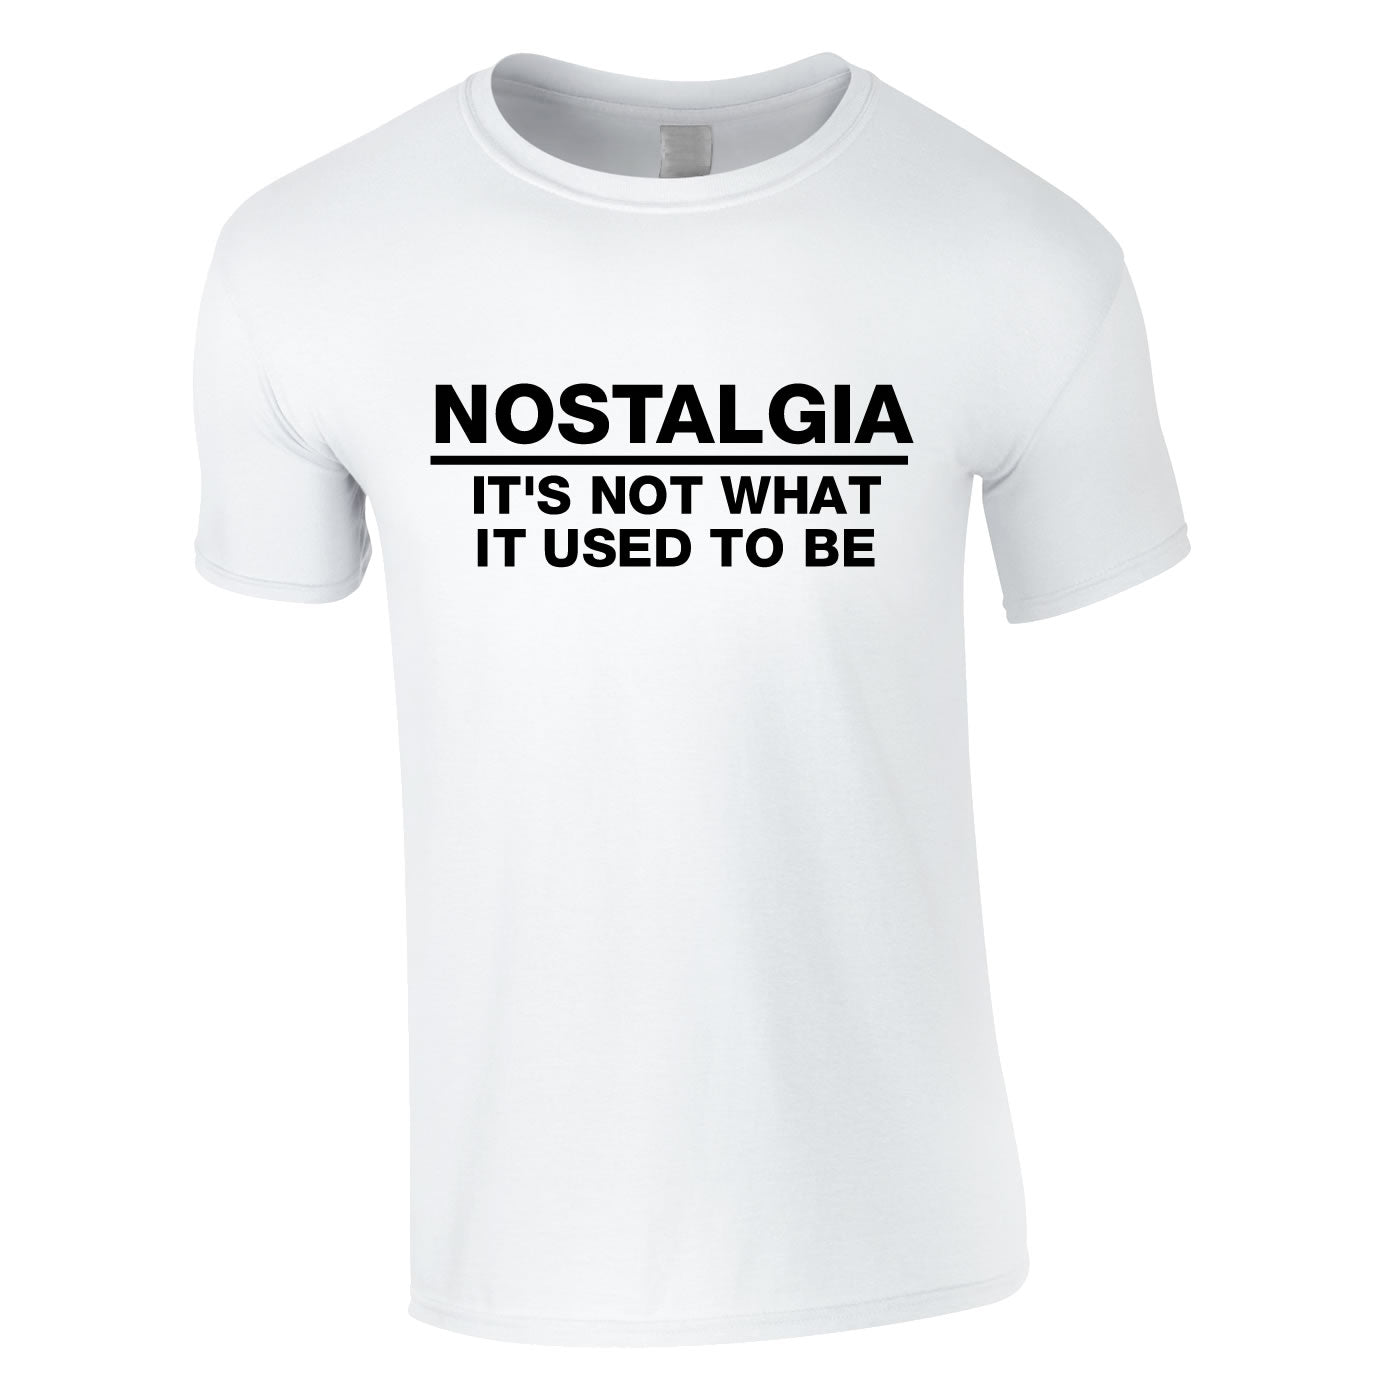 Nostalgia - It's not what it used to be